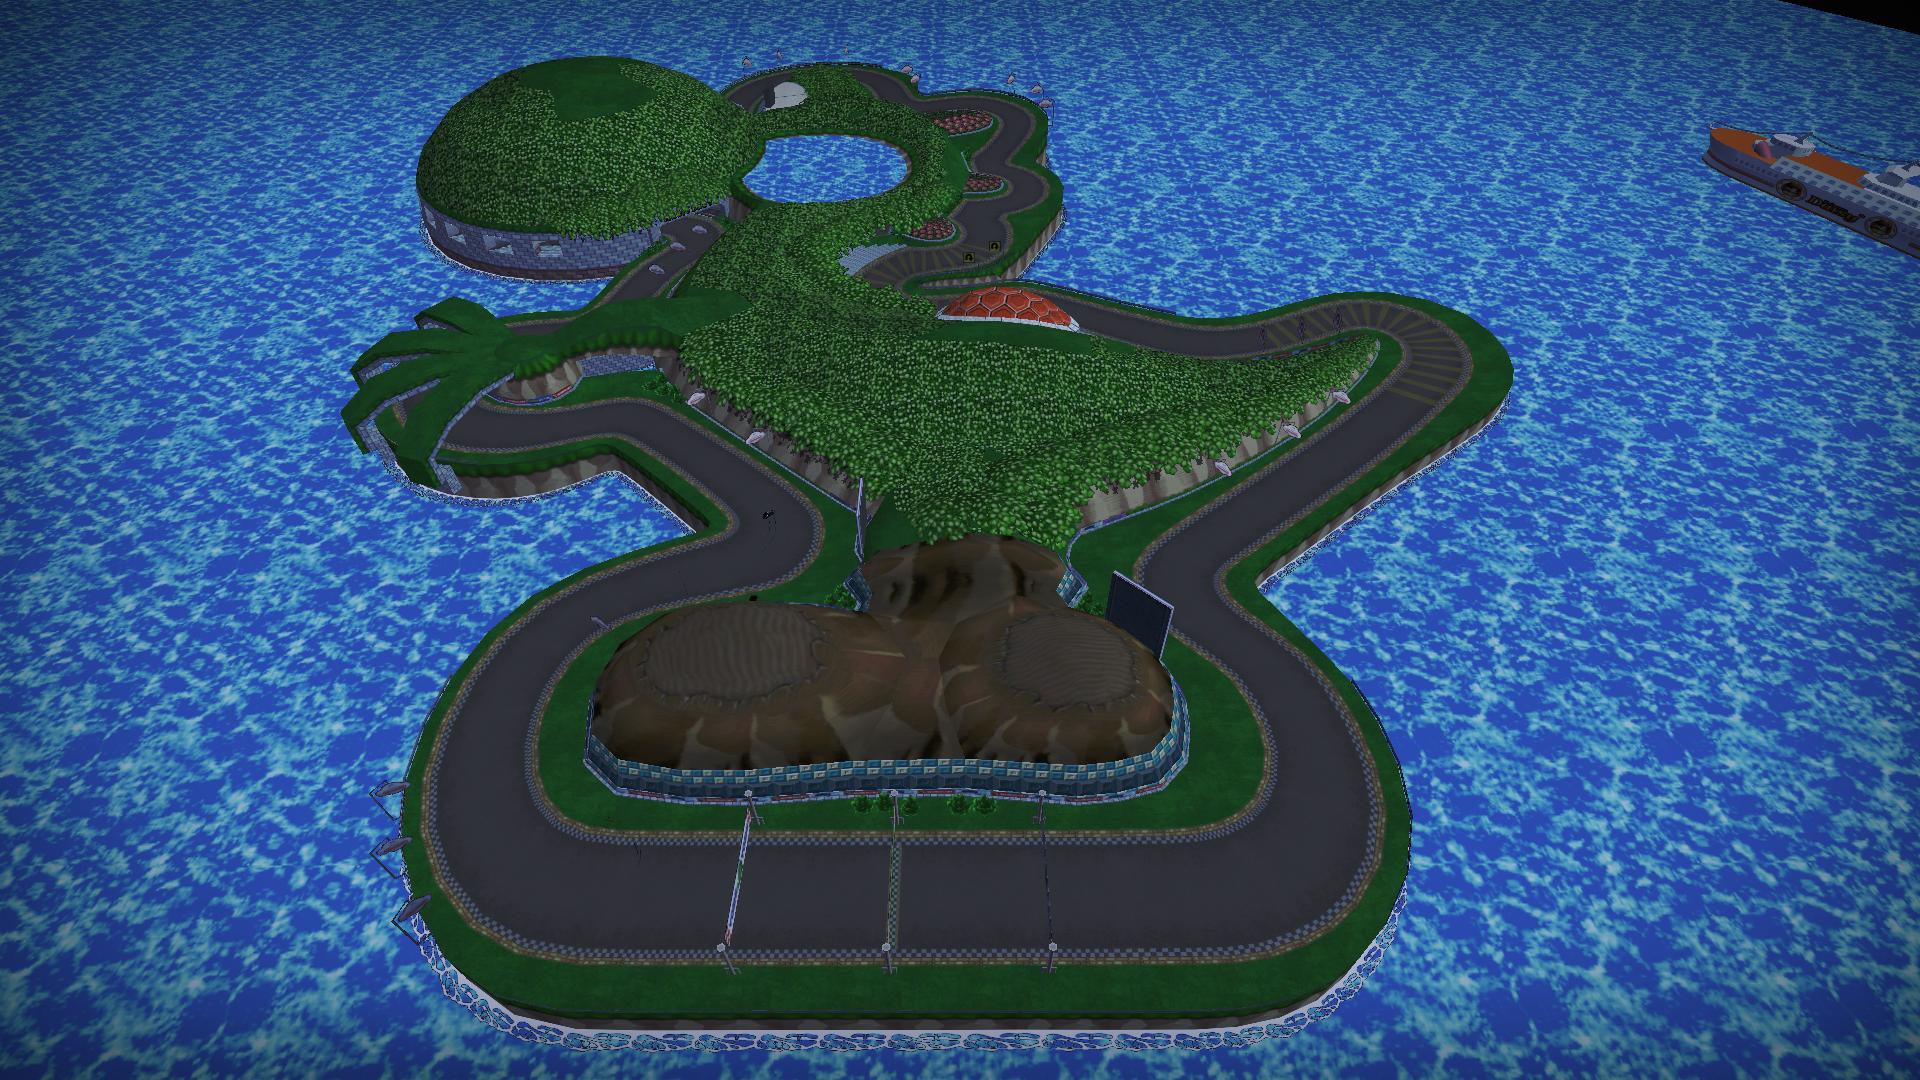 GCN Yoshi Circuit (for both Carbon and Most Wanted)